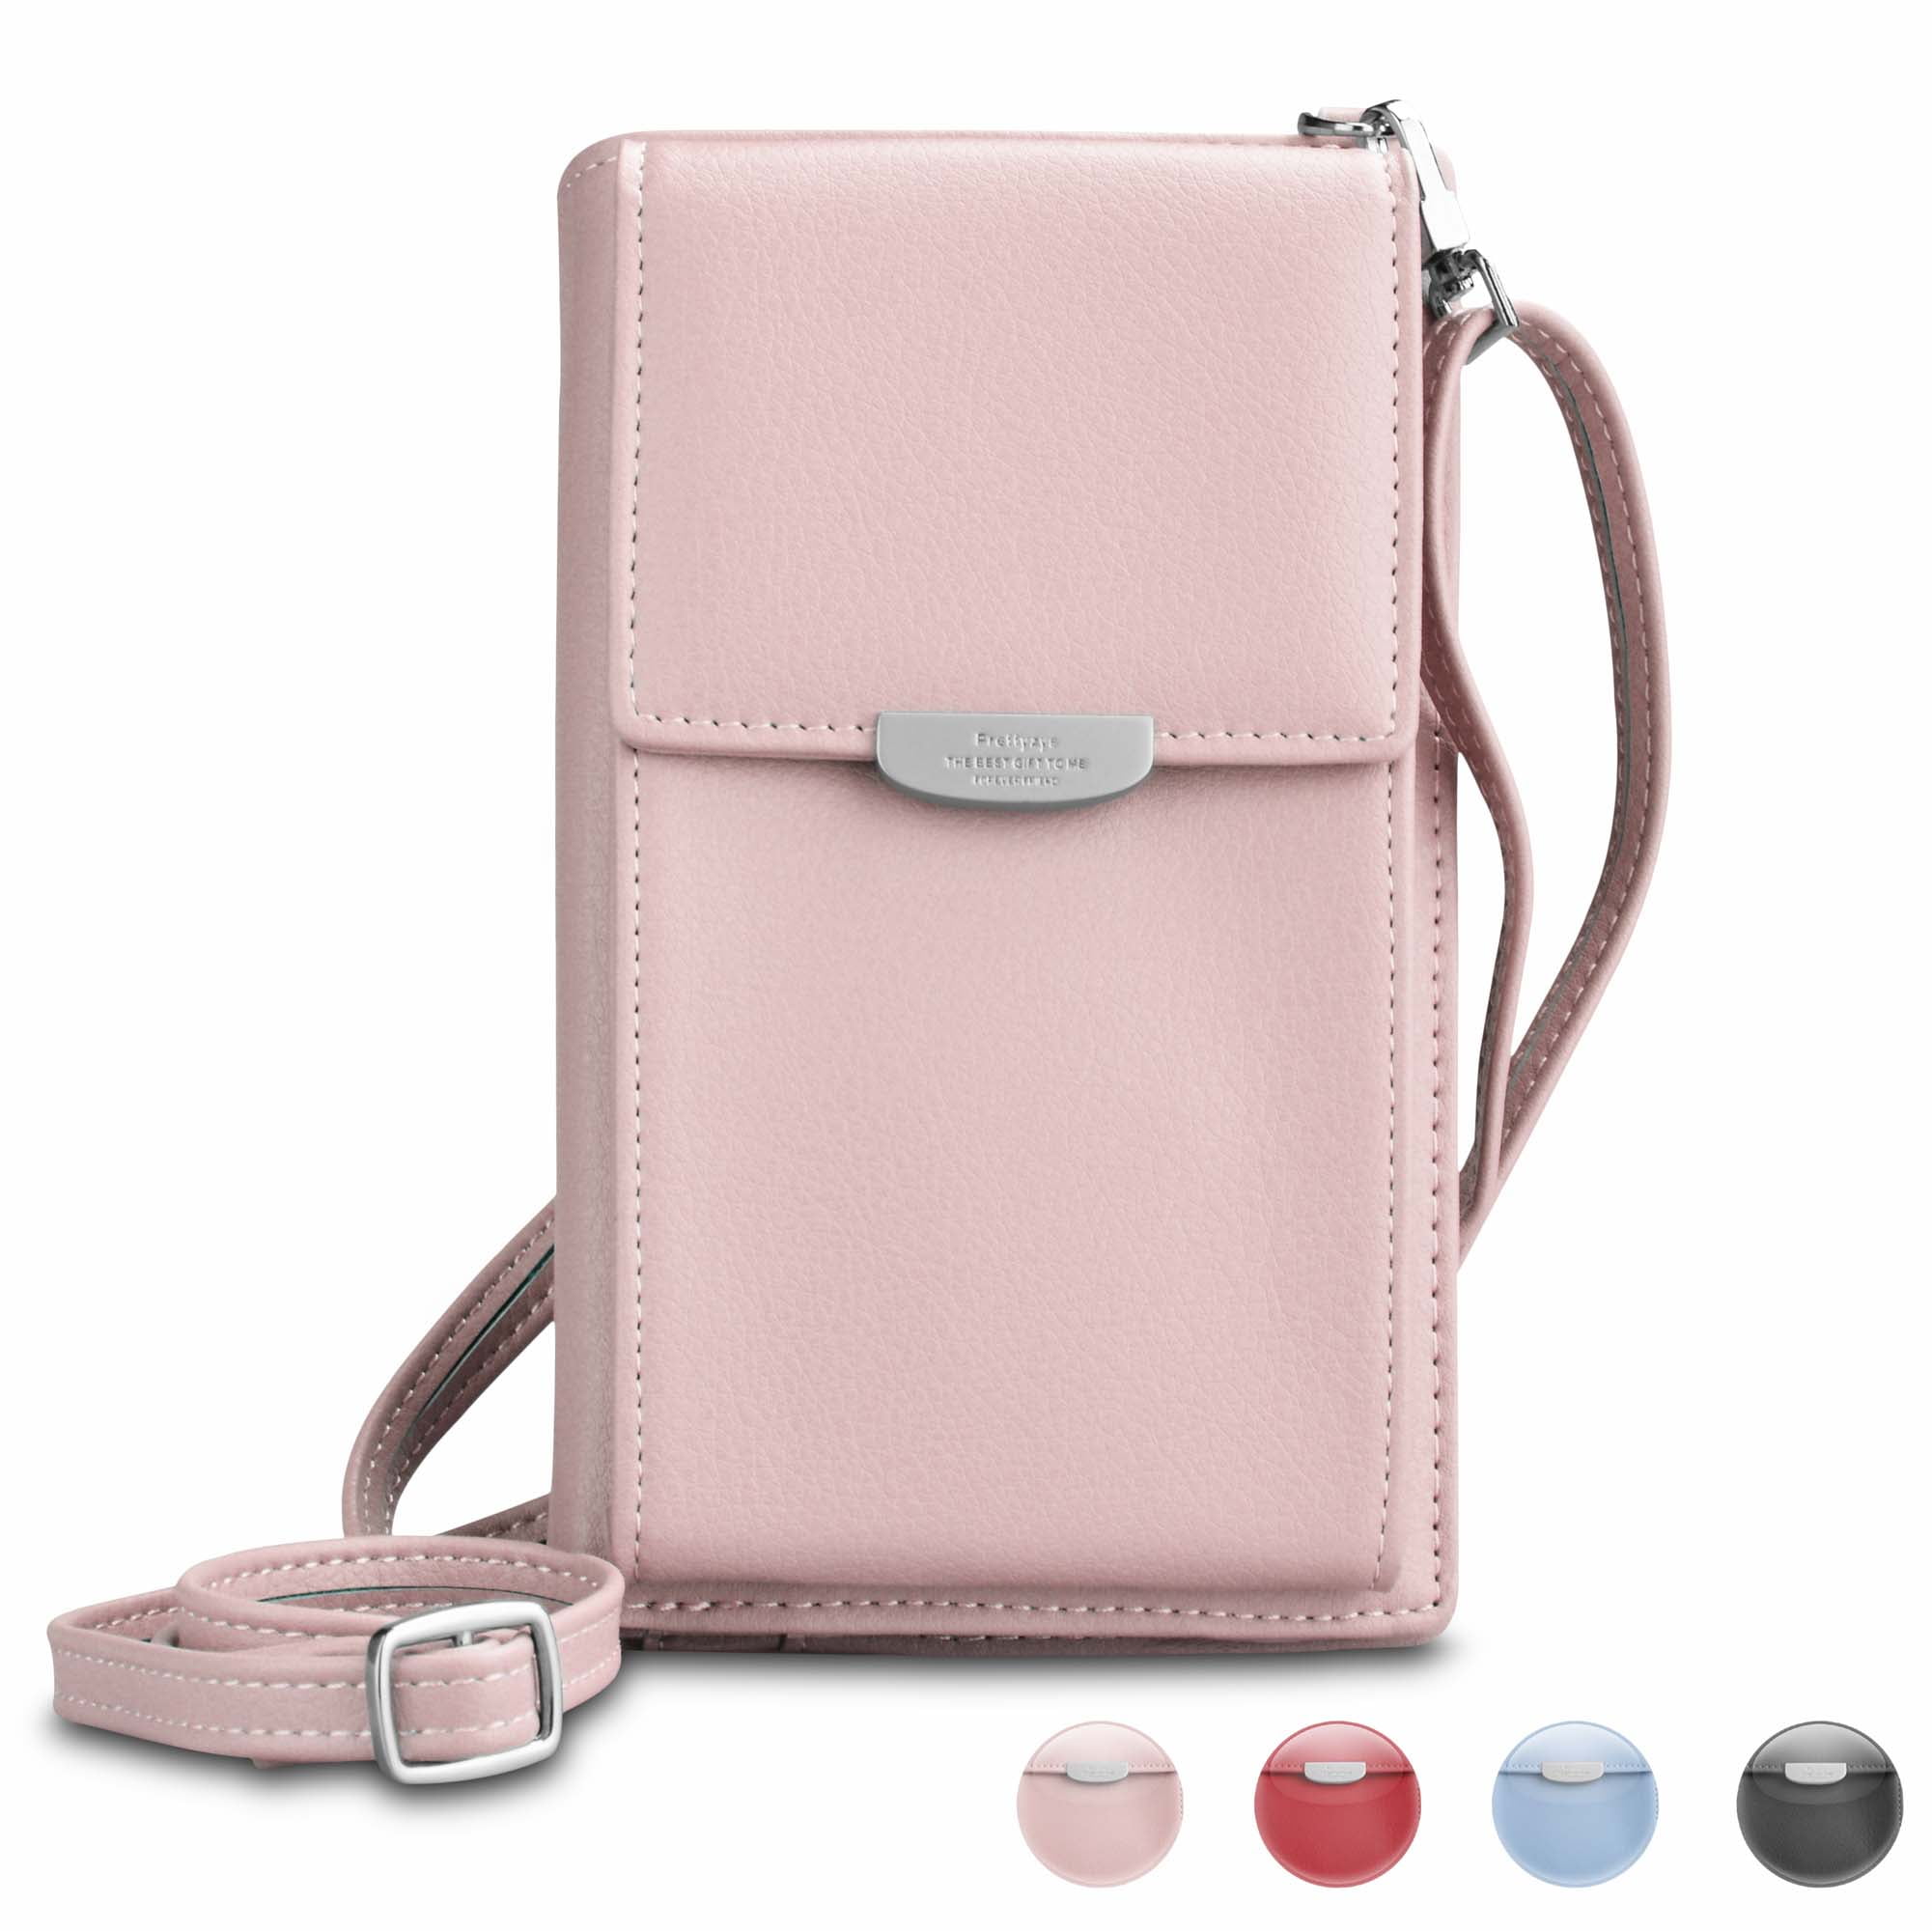 Leather Crossbody Bag Cell Phone Pruse Small Wallet for Women Wristlet Handbags 